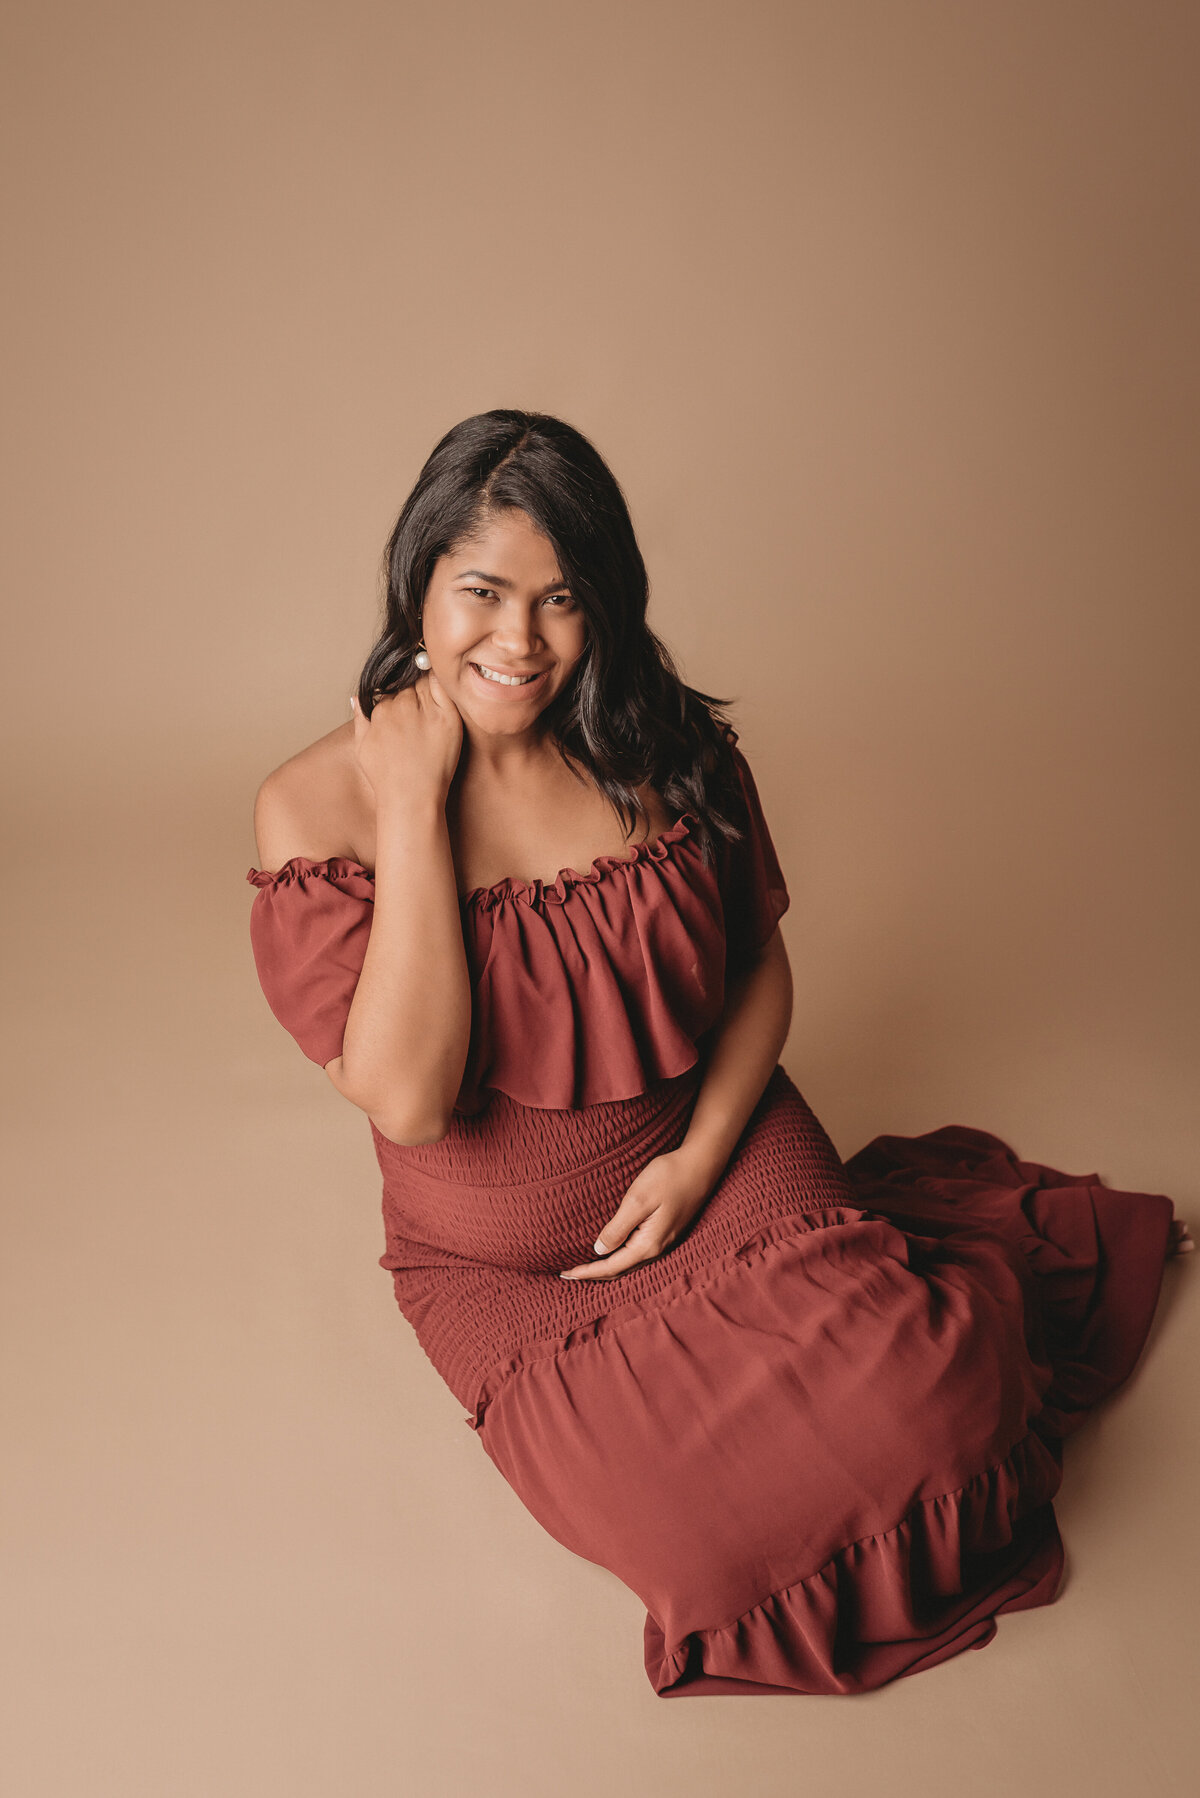 Pregnant woman at 36 weeks wearing burgundy dress posing for maternity portraits on a tan backdrop.